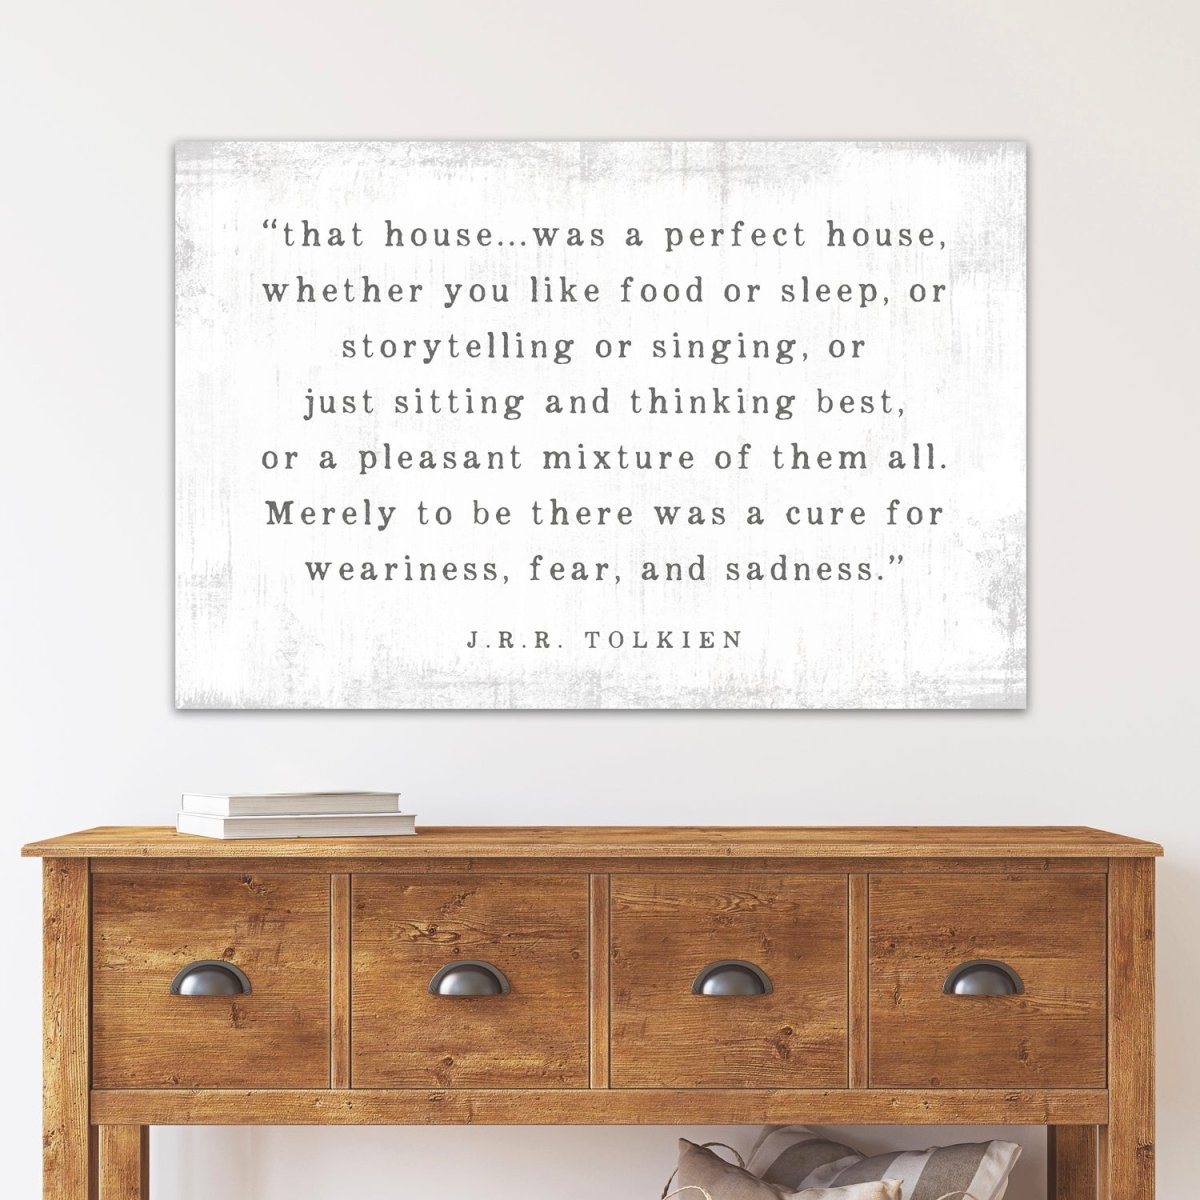 That House Was A Perfect House Sign by J.R.R. Tolkien Above Dresser - Pretty Perfect Studio